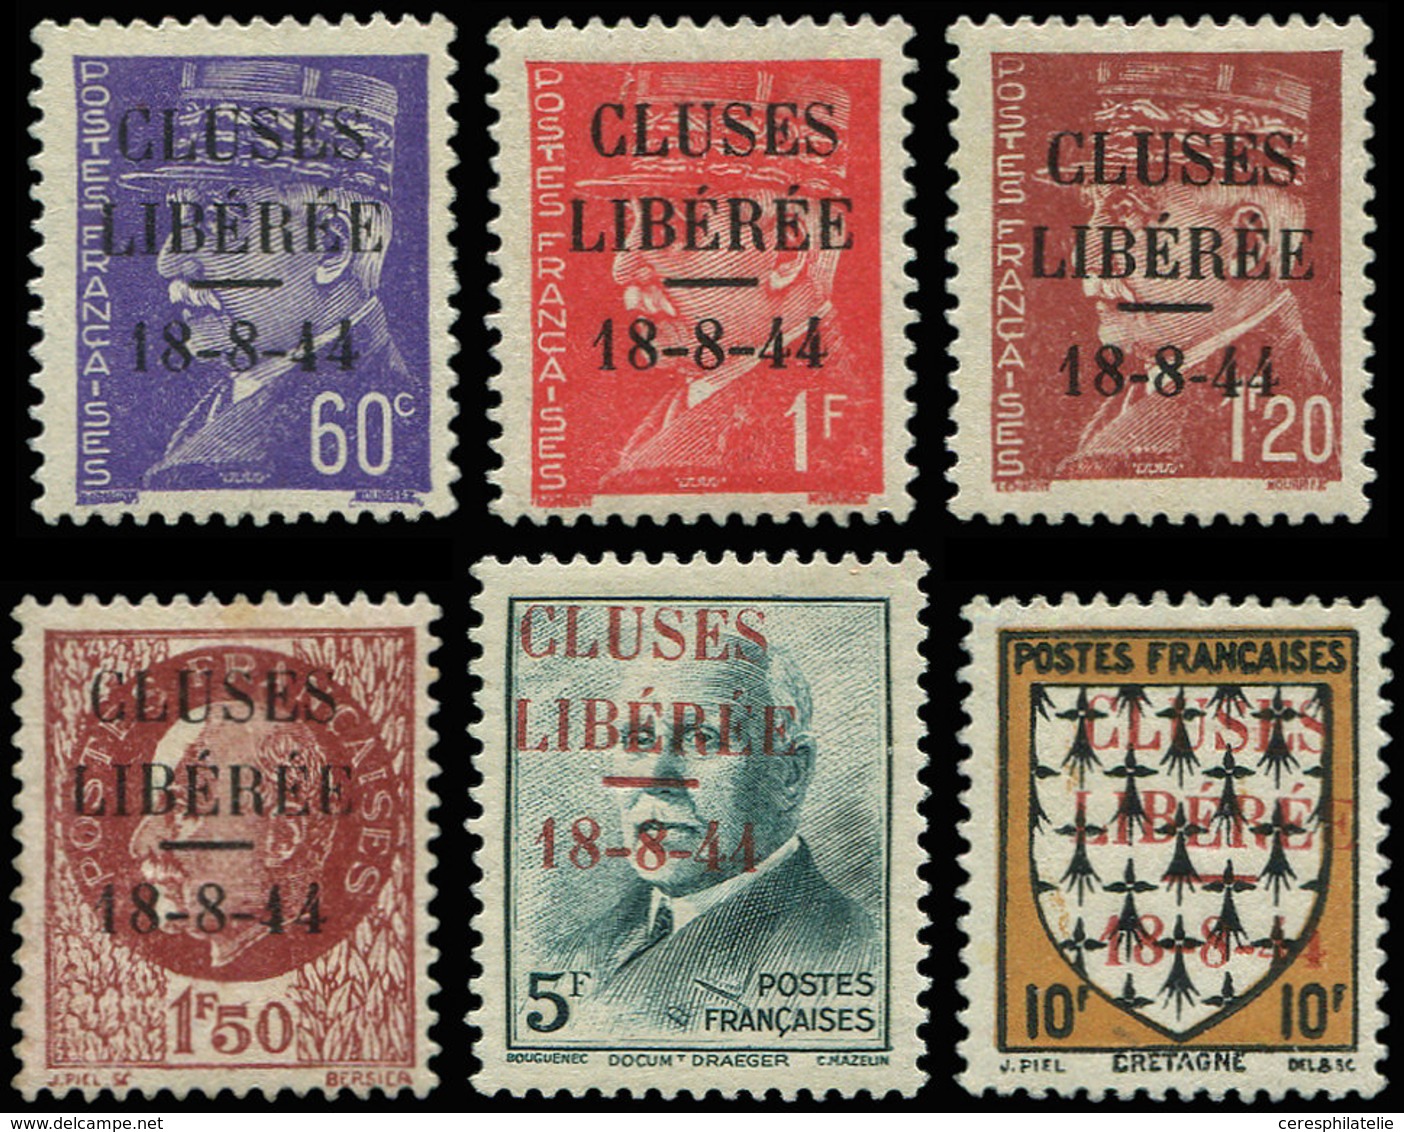 ** TIMBRES DE LIBERATION - CLUSES 1/6 : N°6 Infime Adh., TB - Liberation